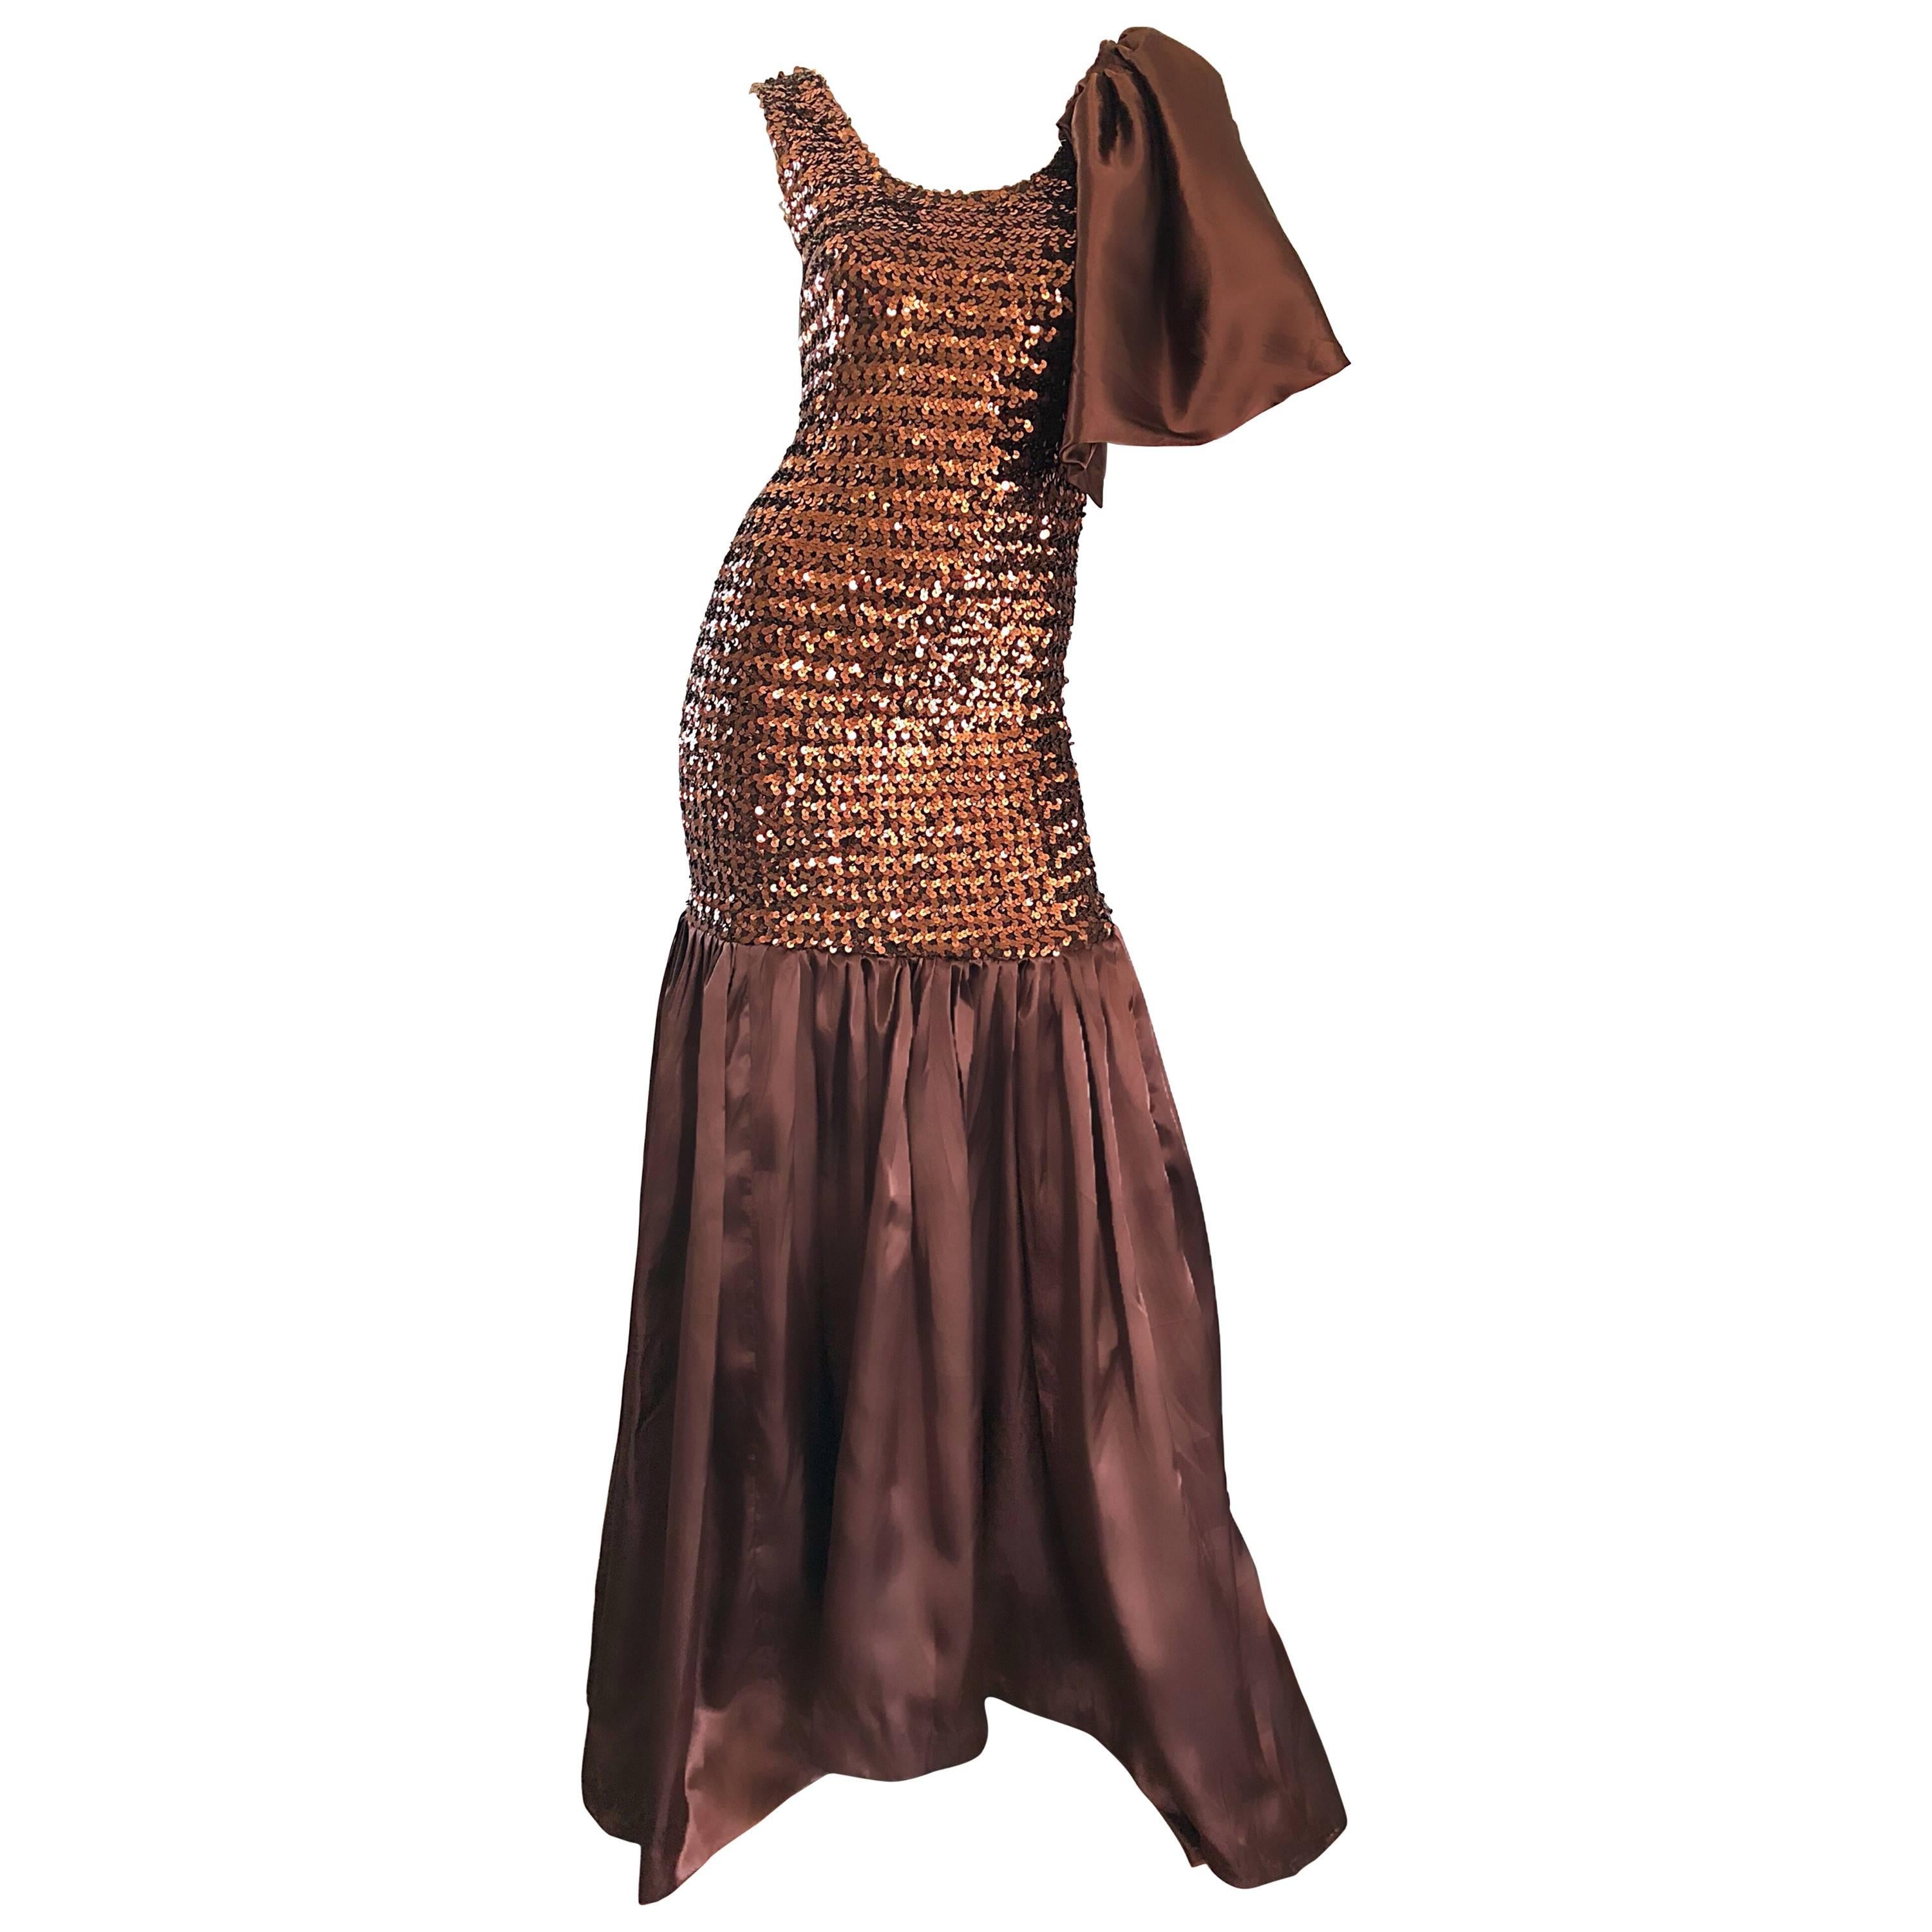 Incredible Vintage Brown Sequin Flamenco Style Mermaid Evening Dress / Gown